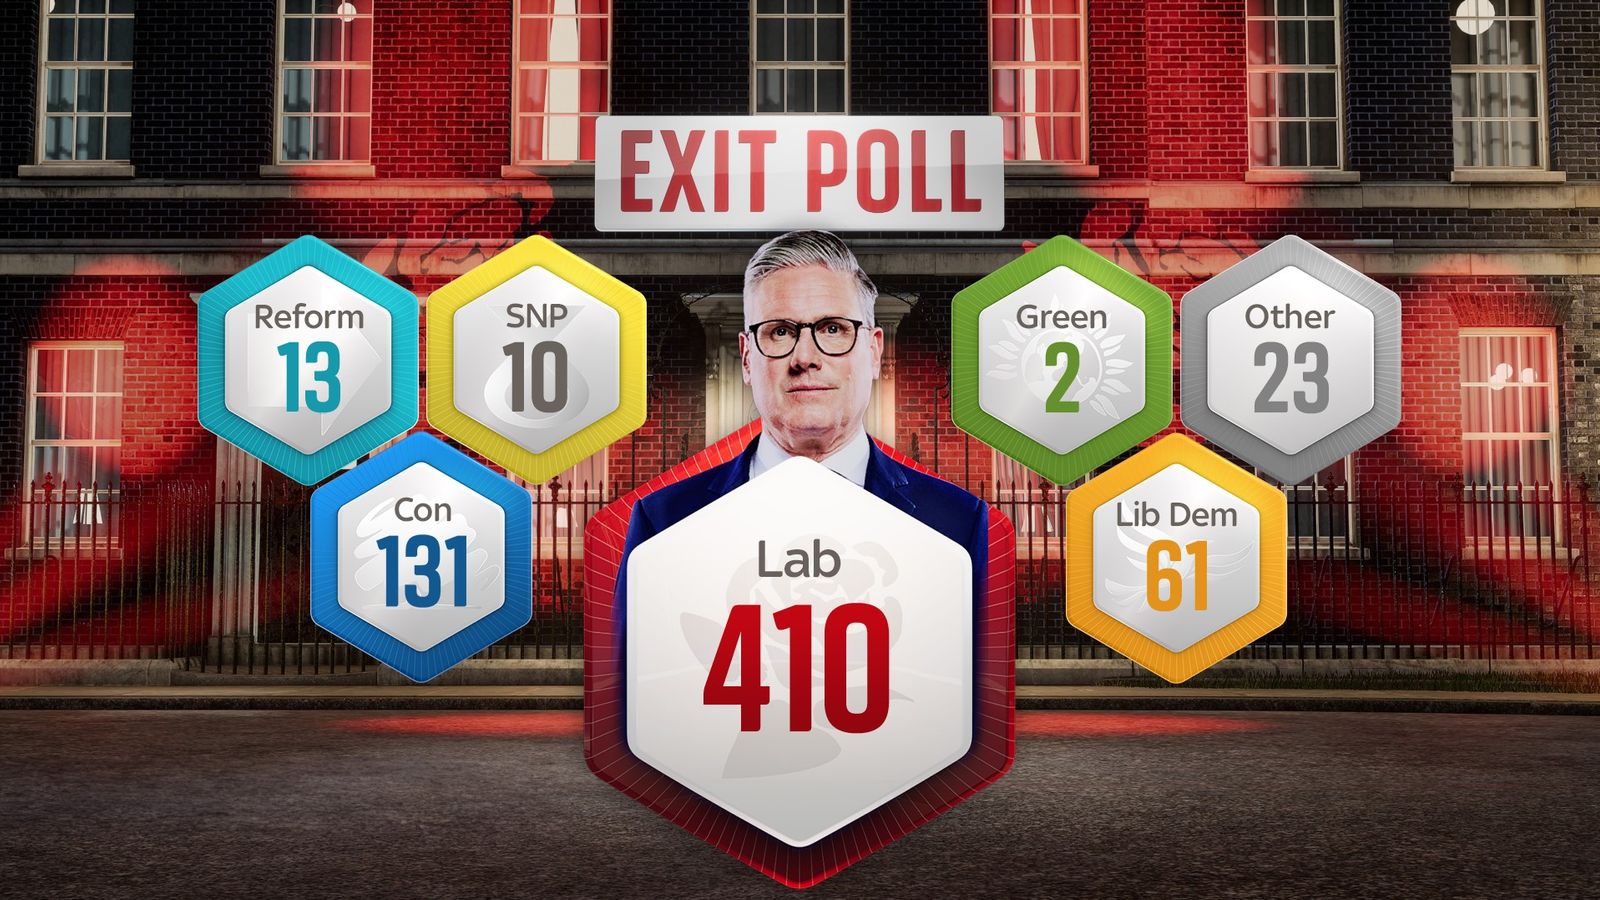 Exit poll: Labour to win landslide in general election